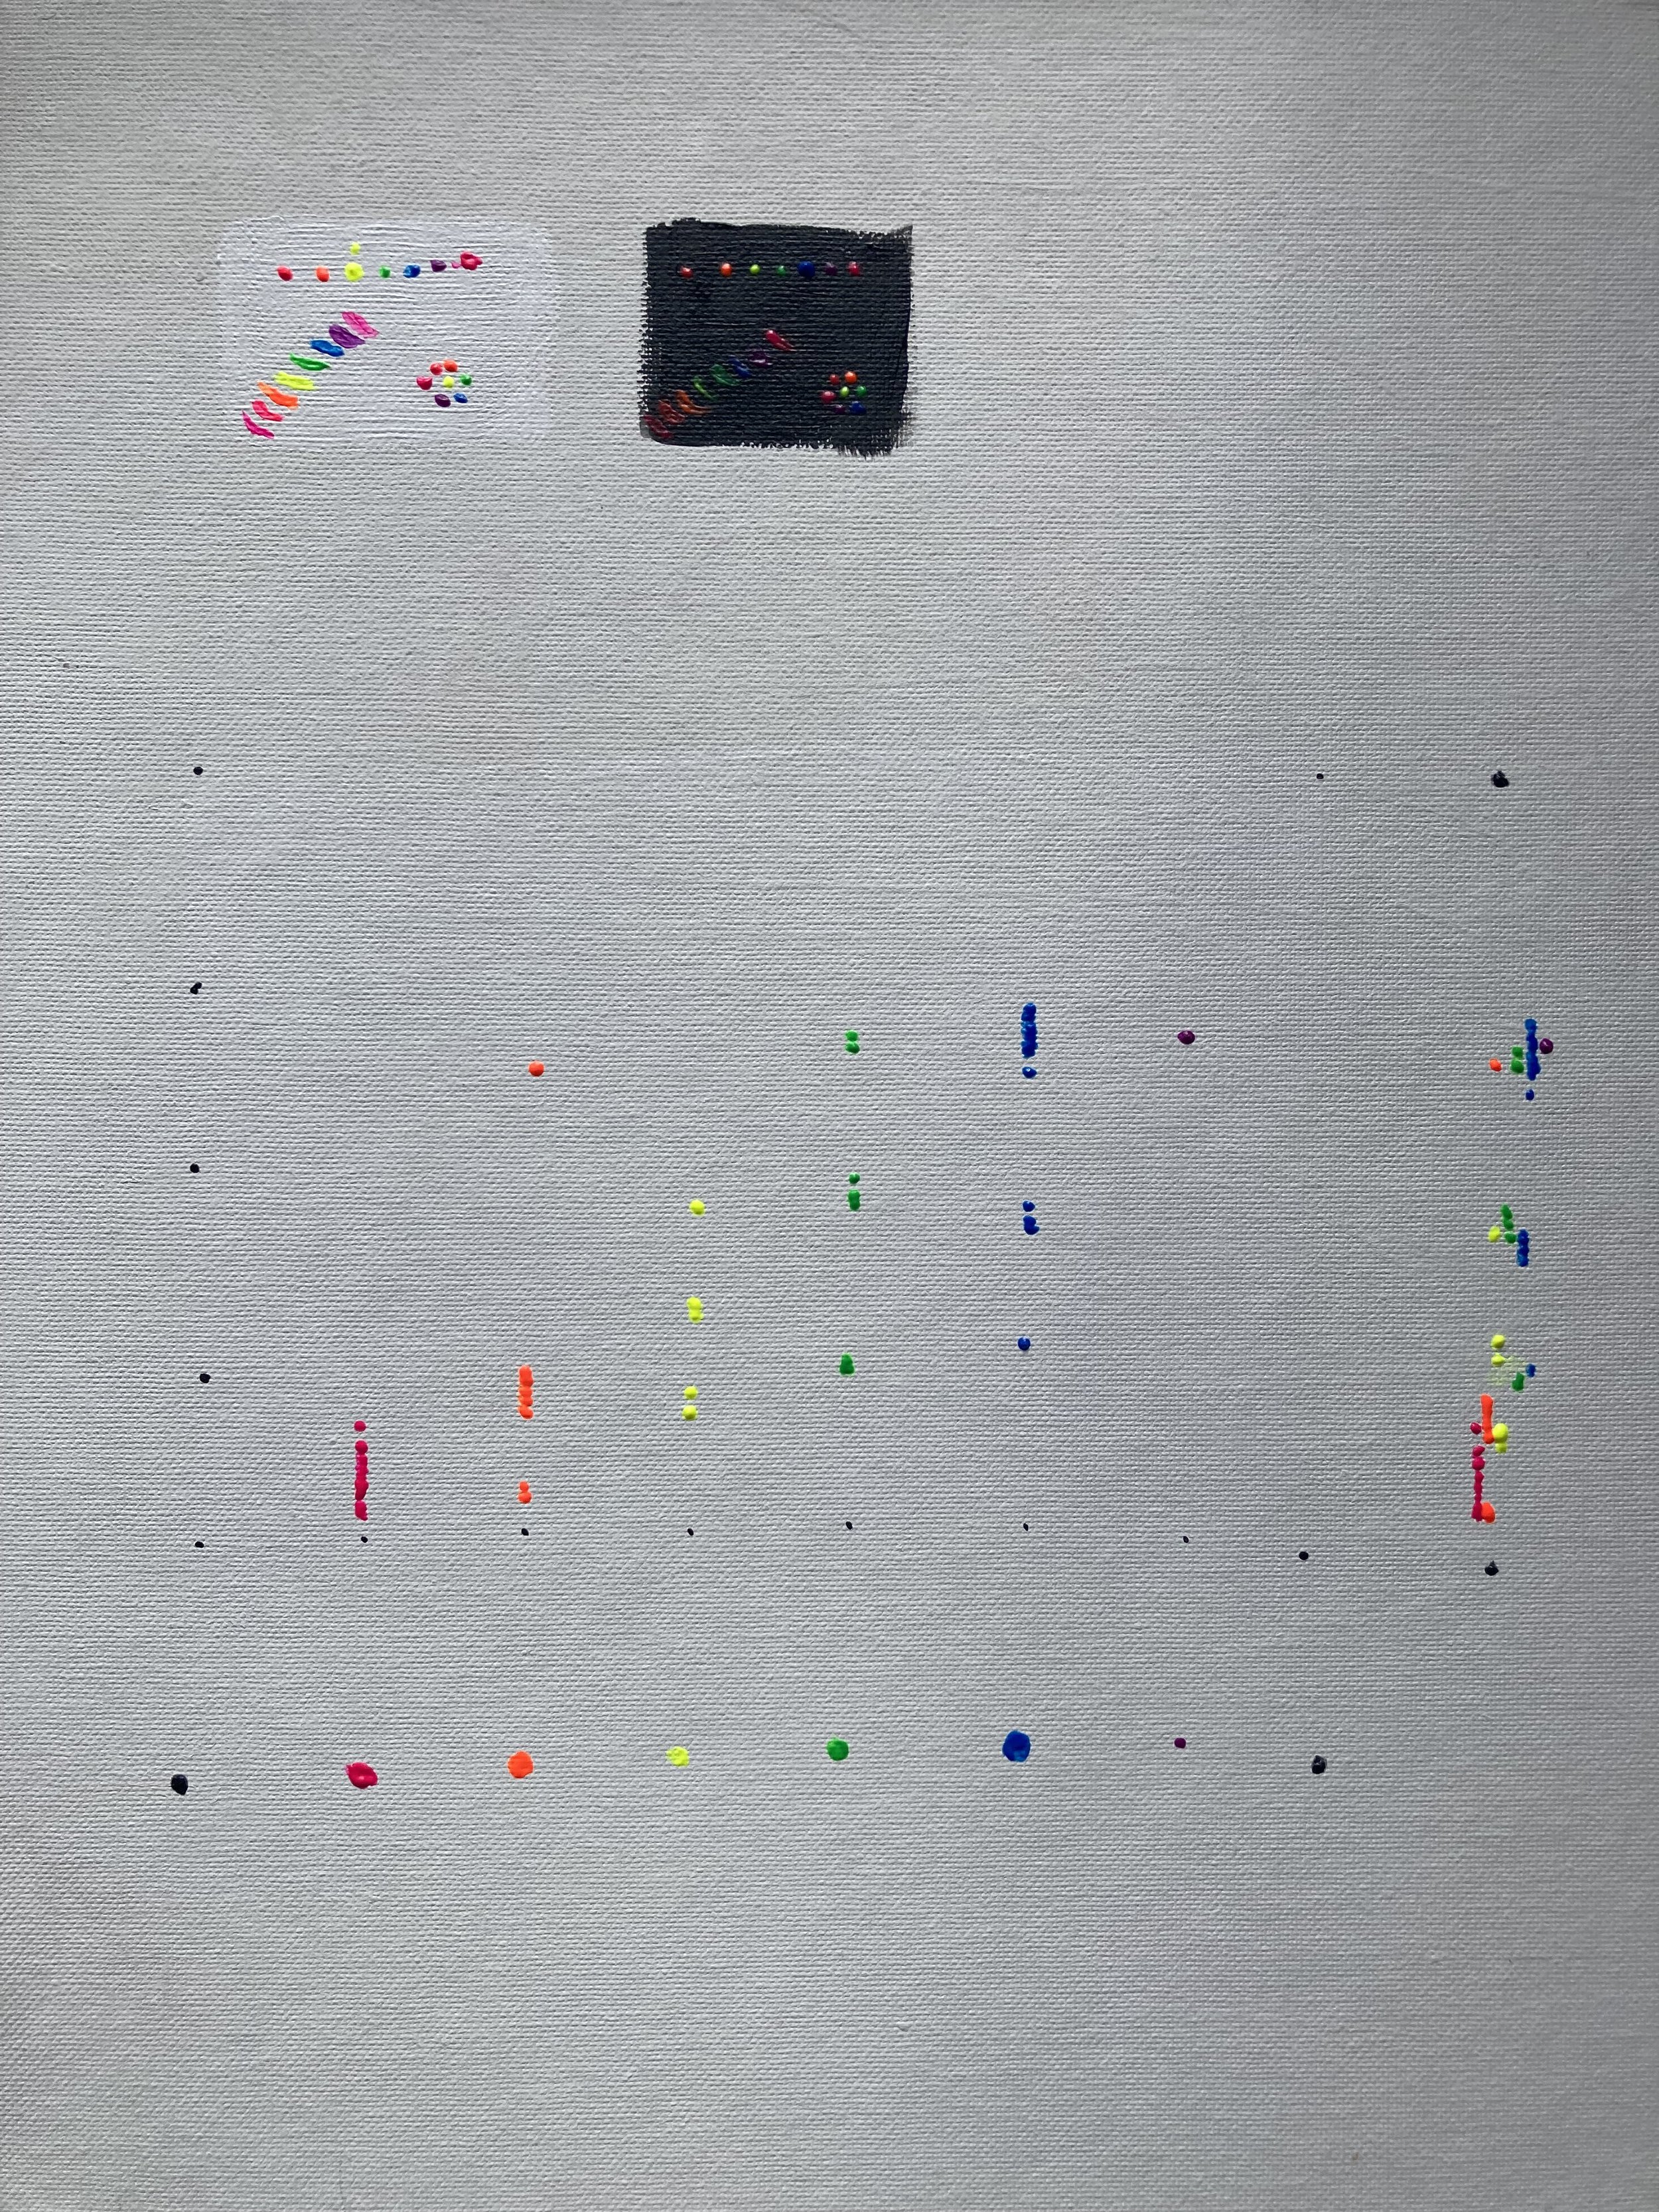  A painting of a chart with magnitude on the x-axis and time on the y-axis, with six colors of dots (colors of the rainbow) present on the plot, all on a white background.  